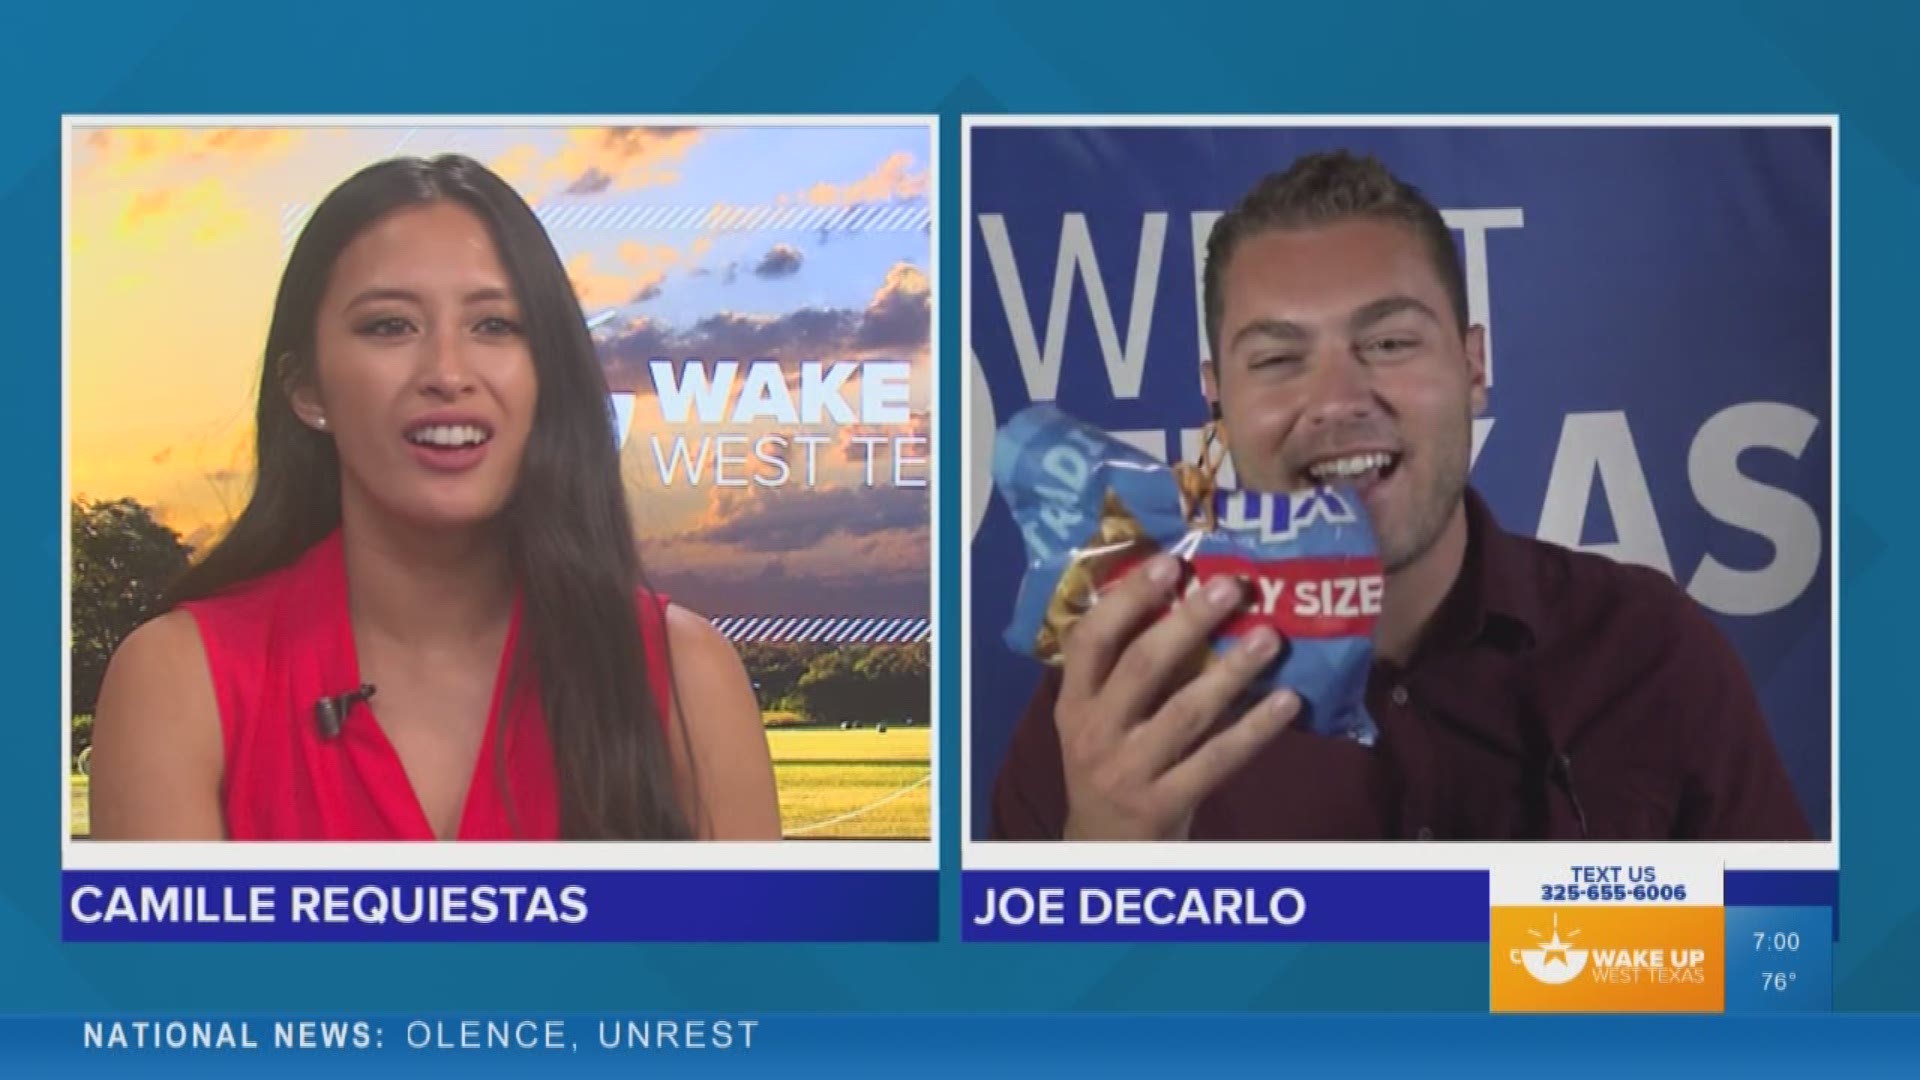 Joe DeCarlo and Camille Requiestas celebrate 'National Junk Food Day' with their favorite snacks